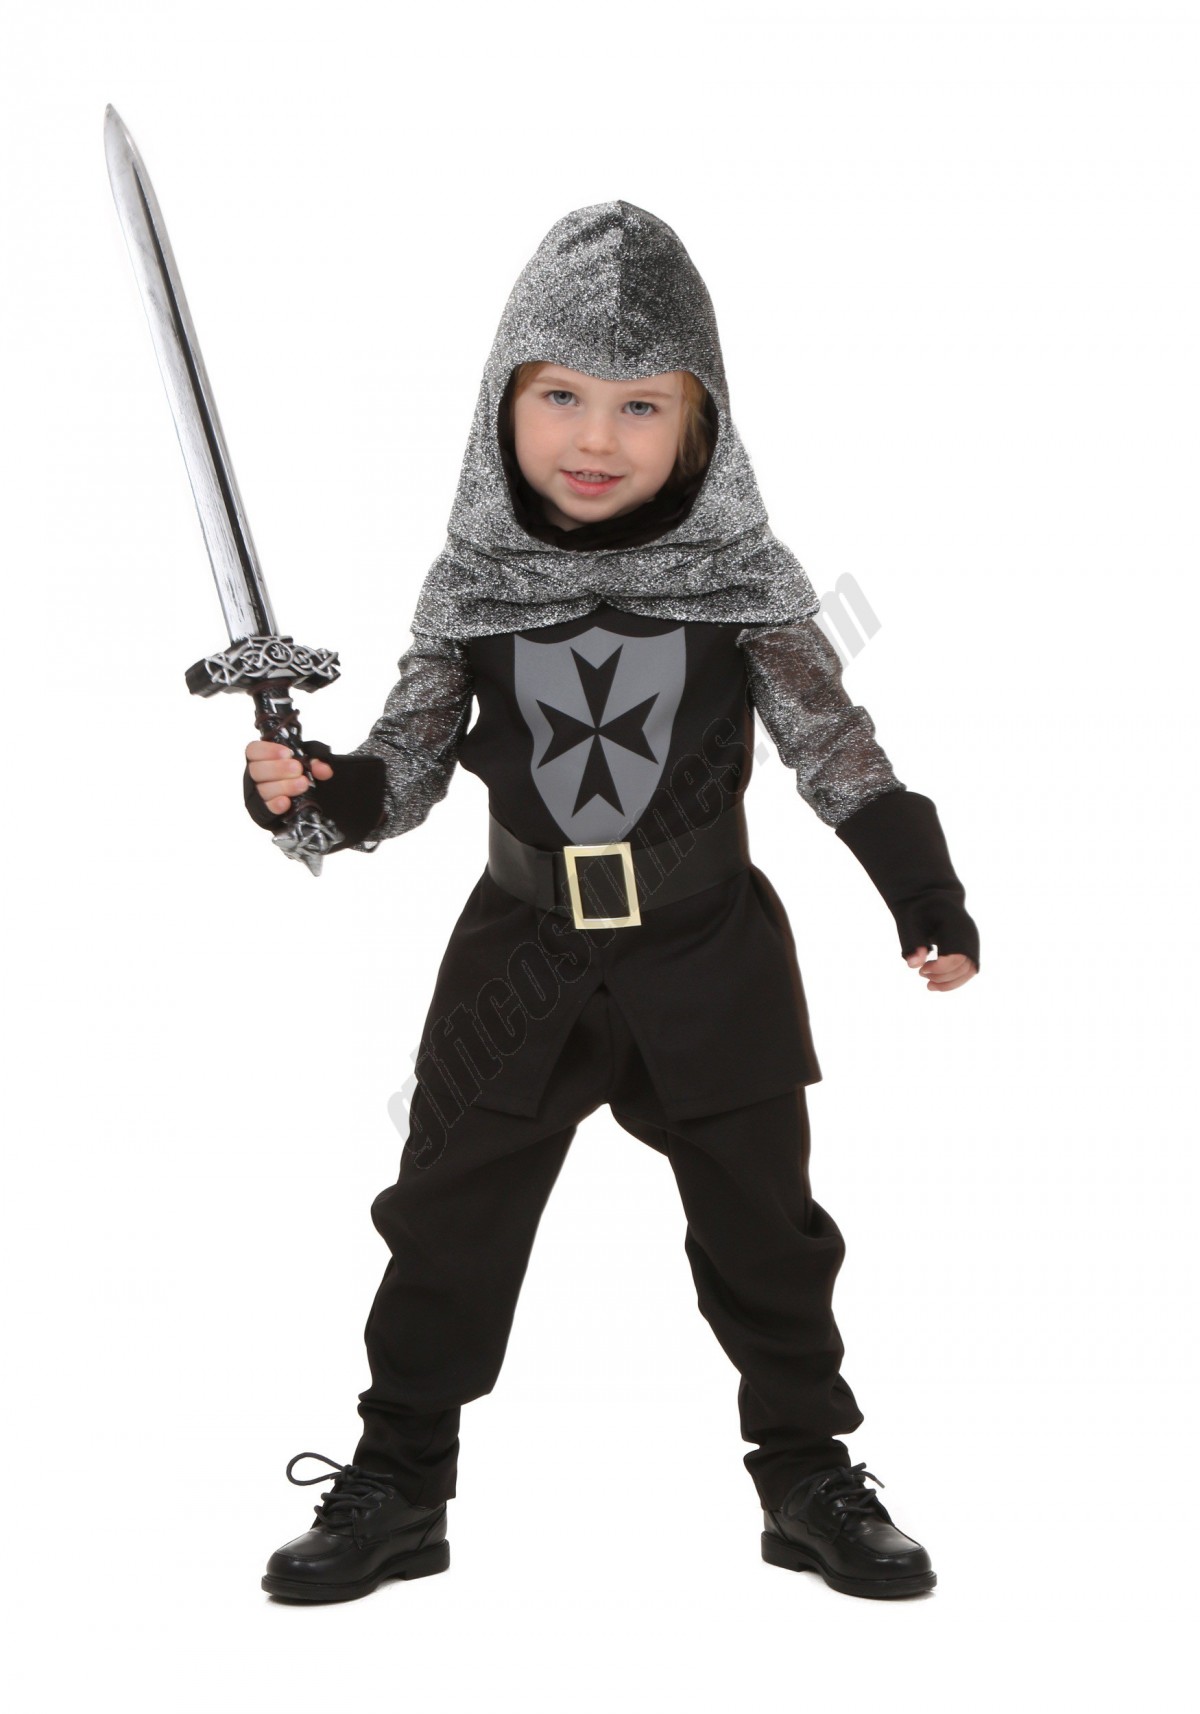 Toddler Valiant Knight Costume Promotions - -0